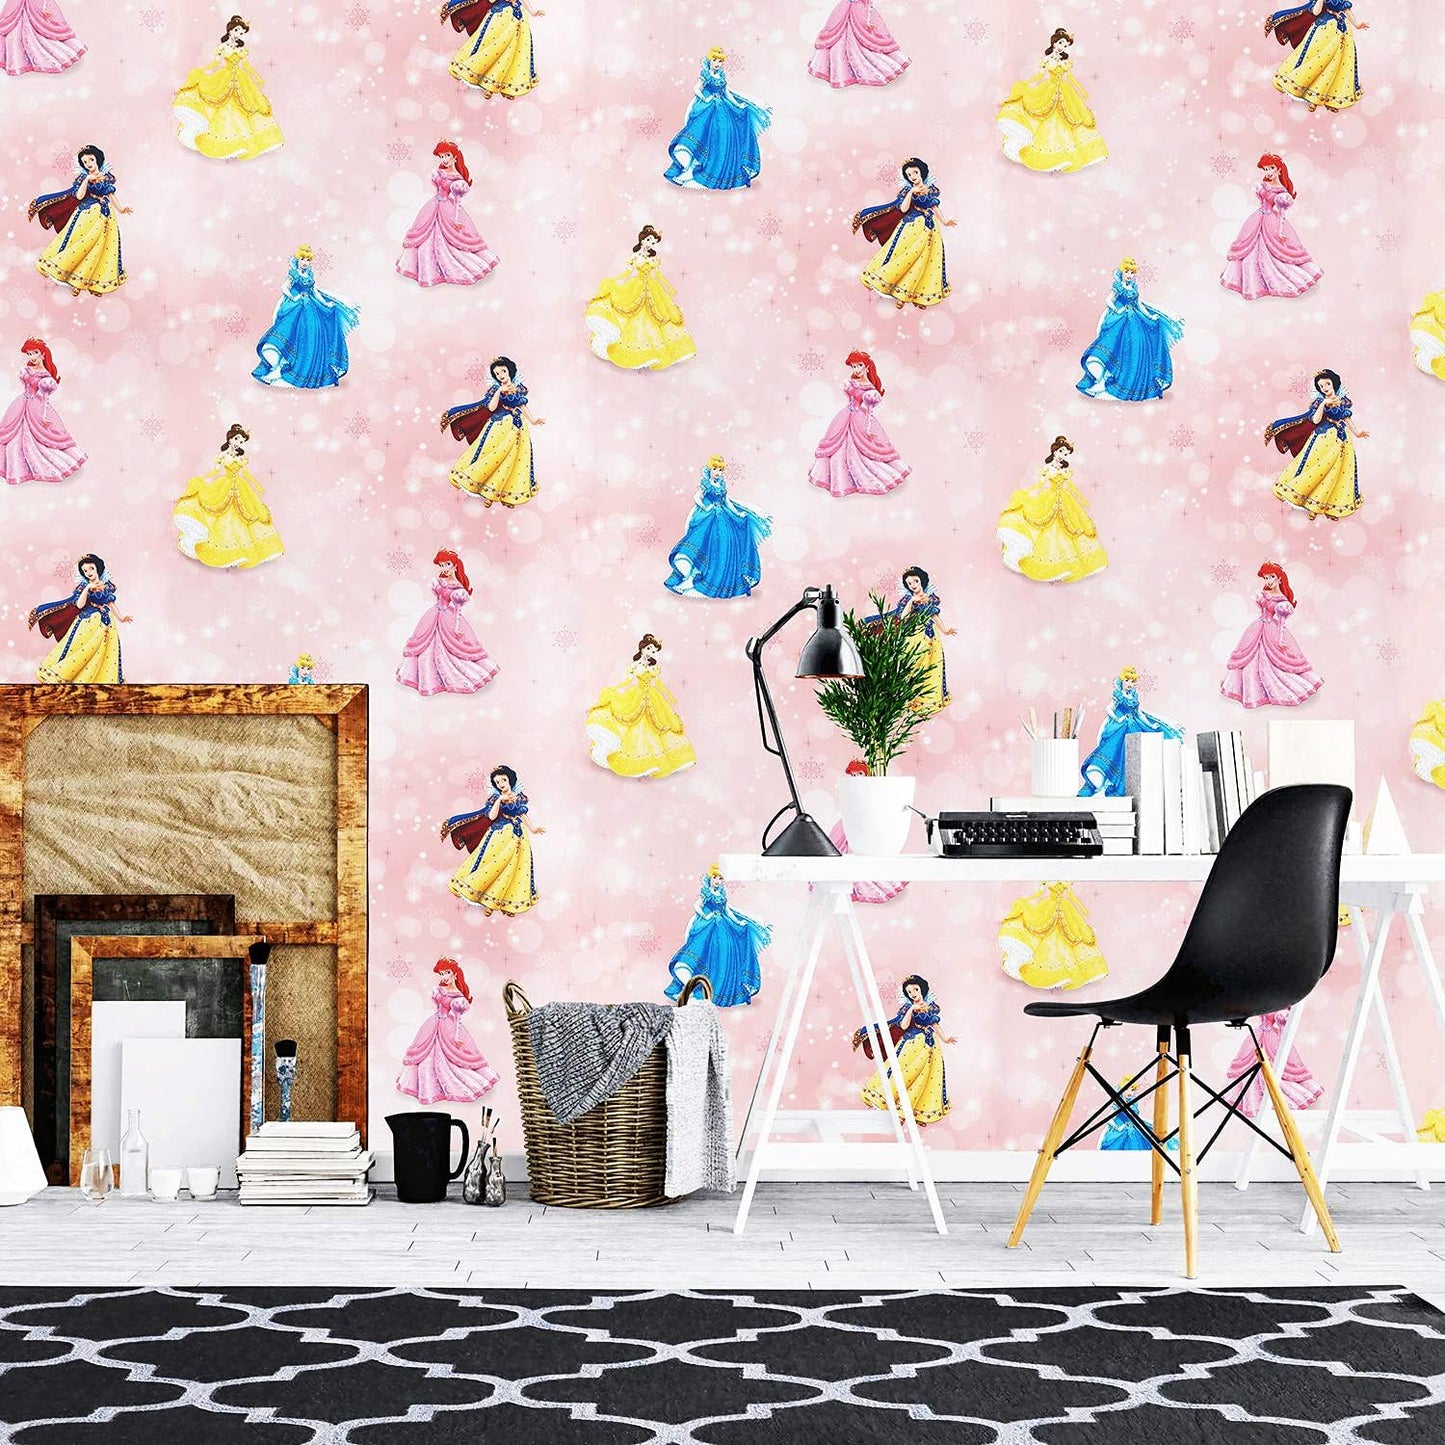 3D Latest Barbie Design Light Pink Wallpaper Roll for Home Walls 57 Sq Ft (0.53m or 33 Feet)